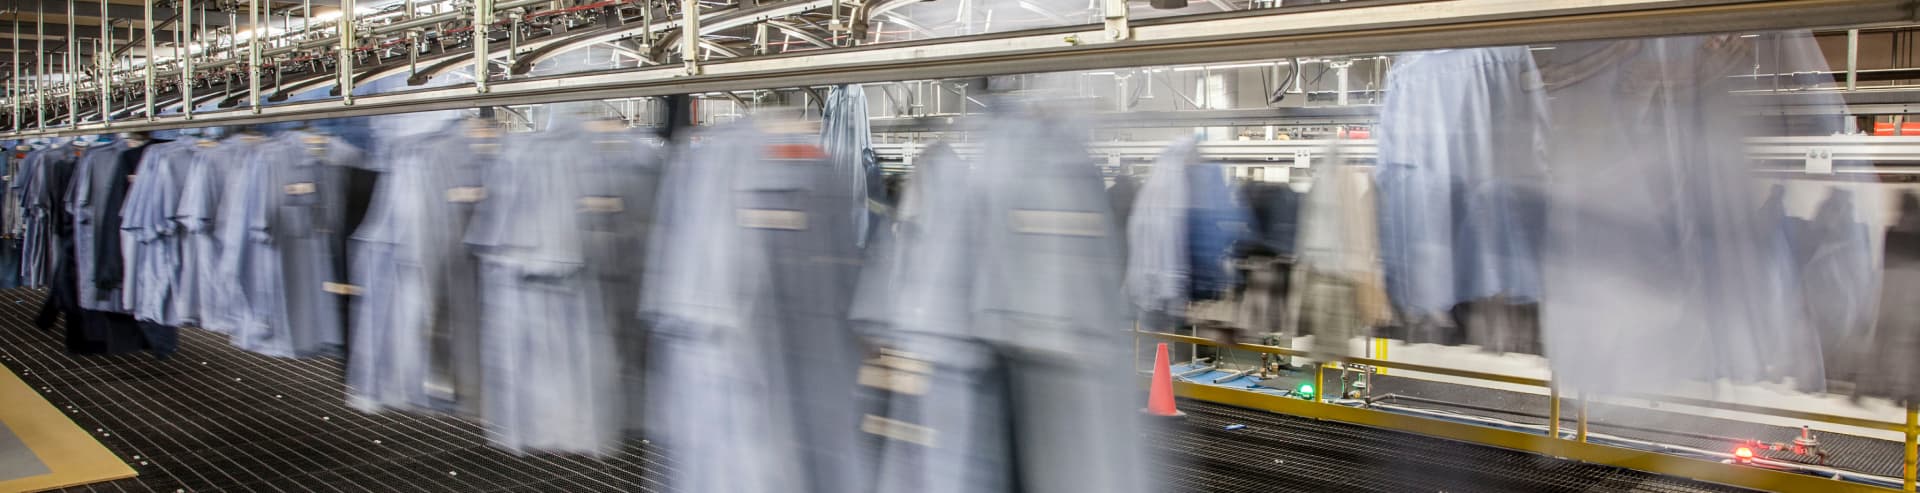 Garment sorting in motion on rail system